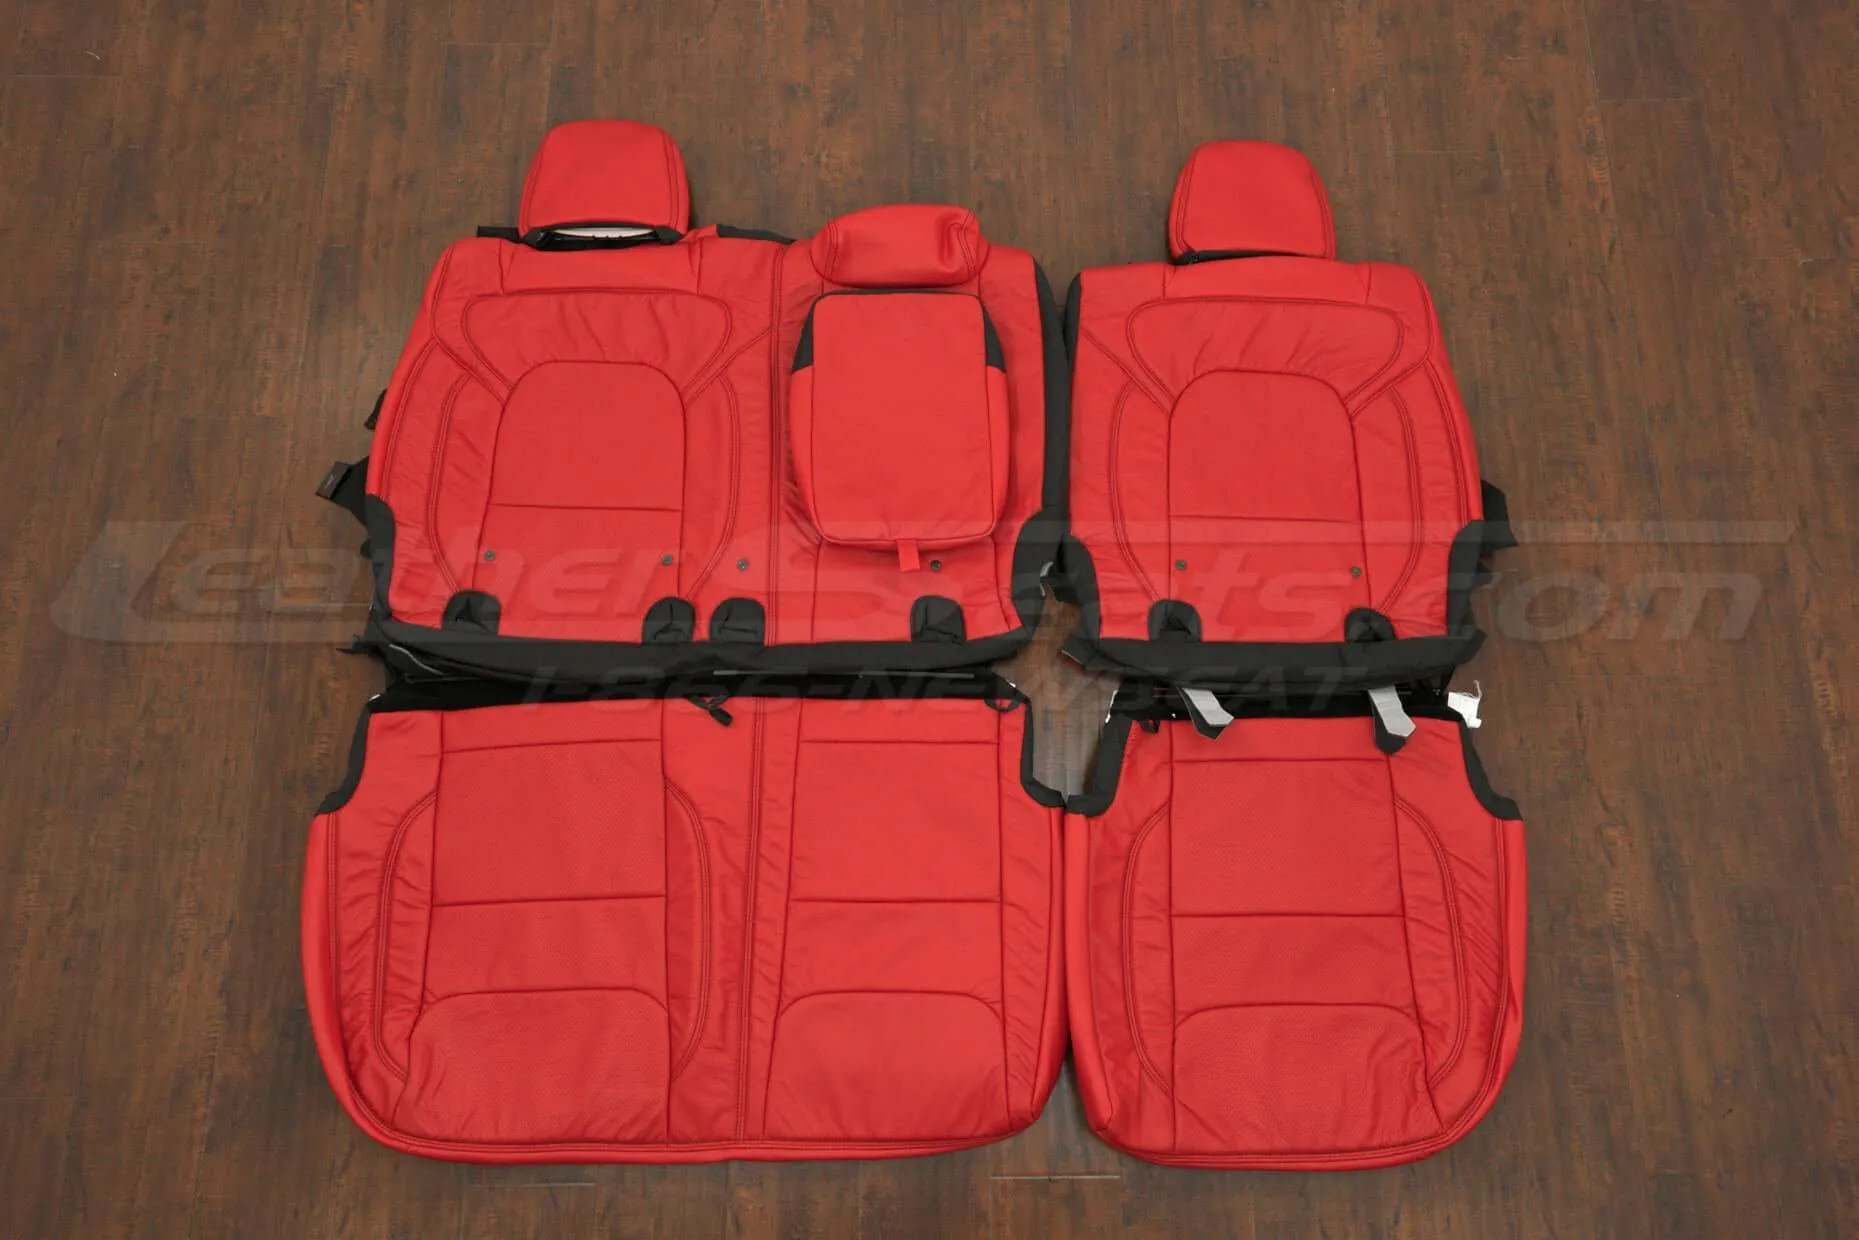 2021 Dodge Ram Bright Red Leather Kit - Rear seat upholstery and armrest